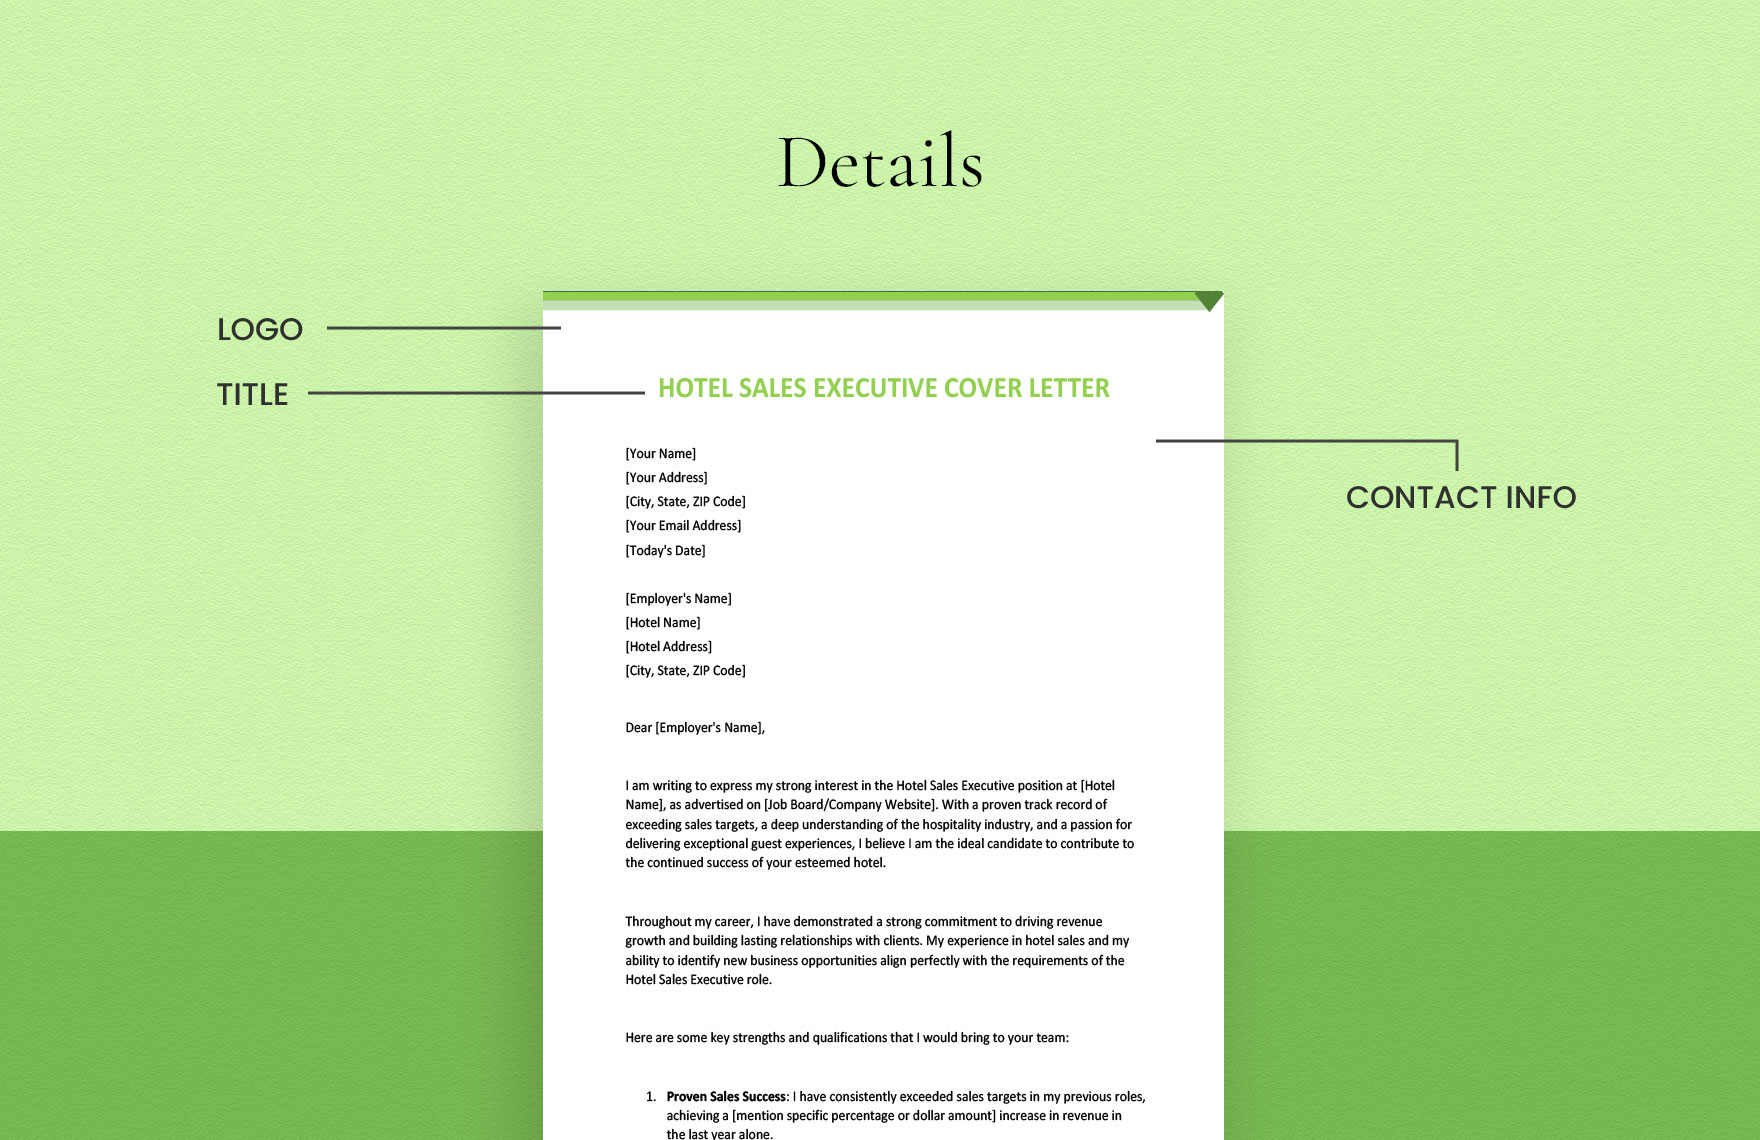 Hotel Sales Executive Cover Letter